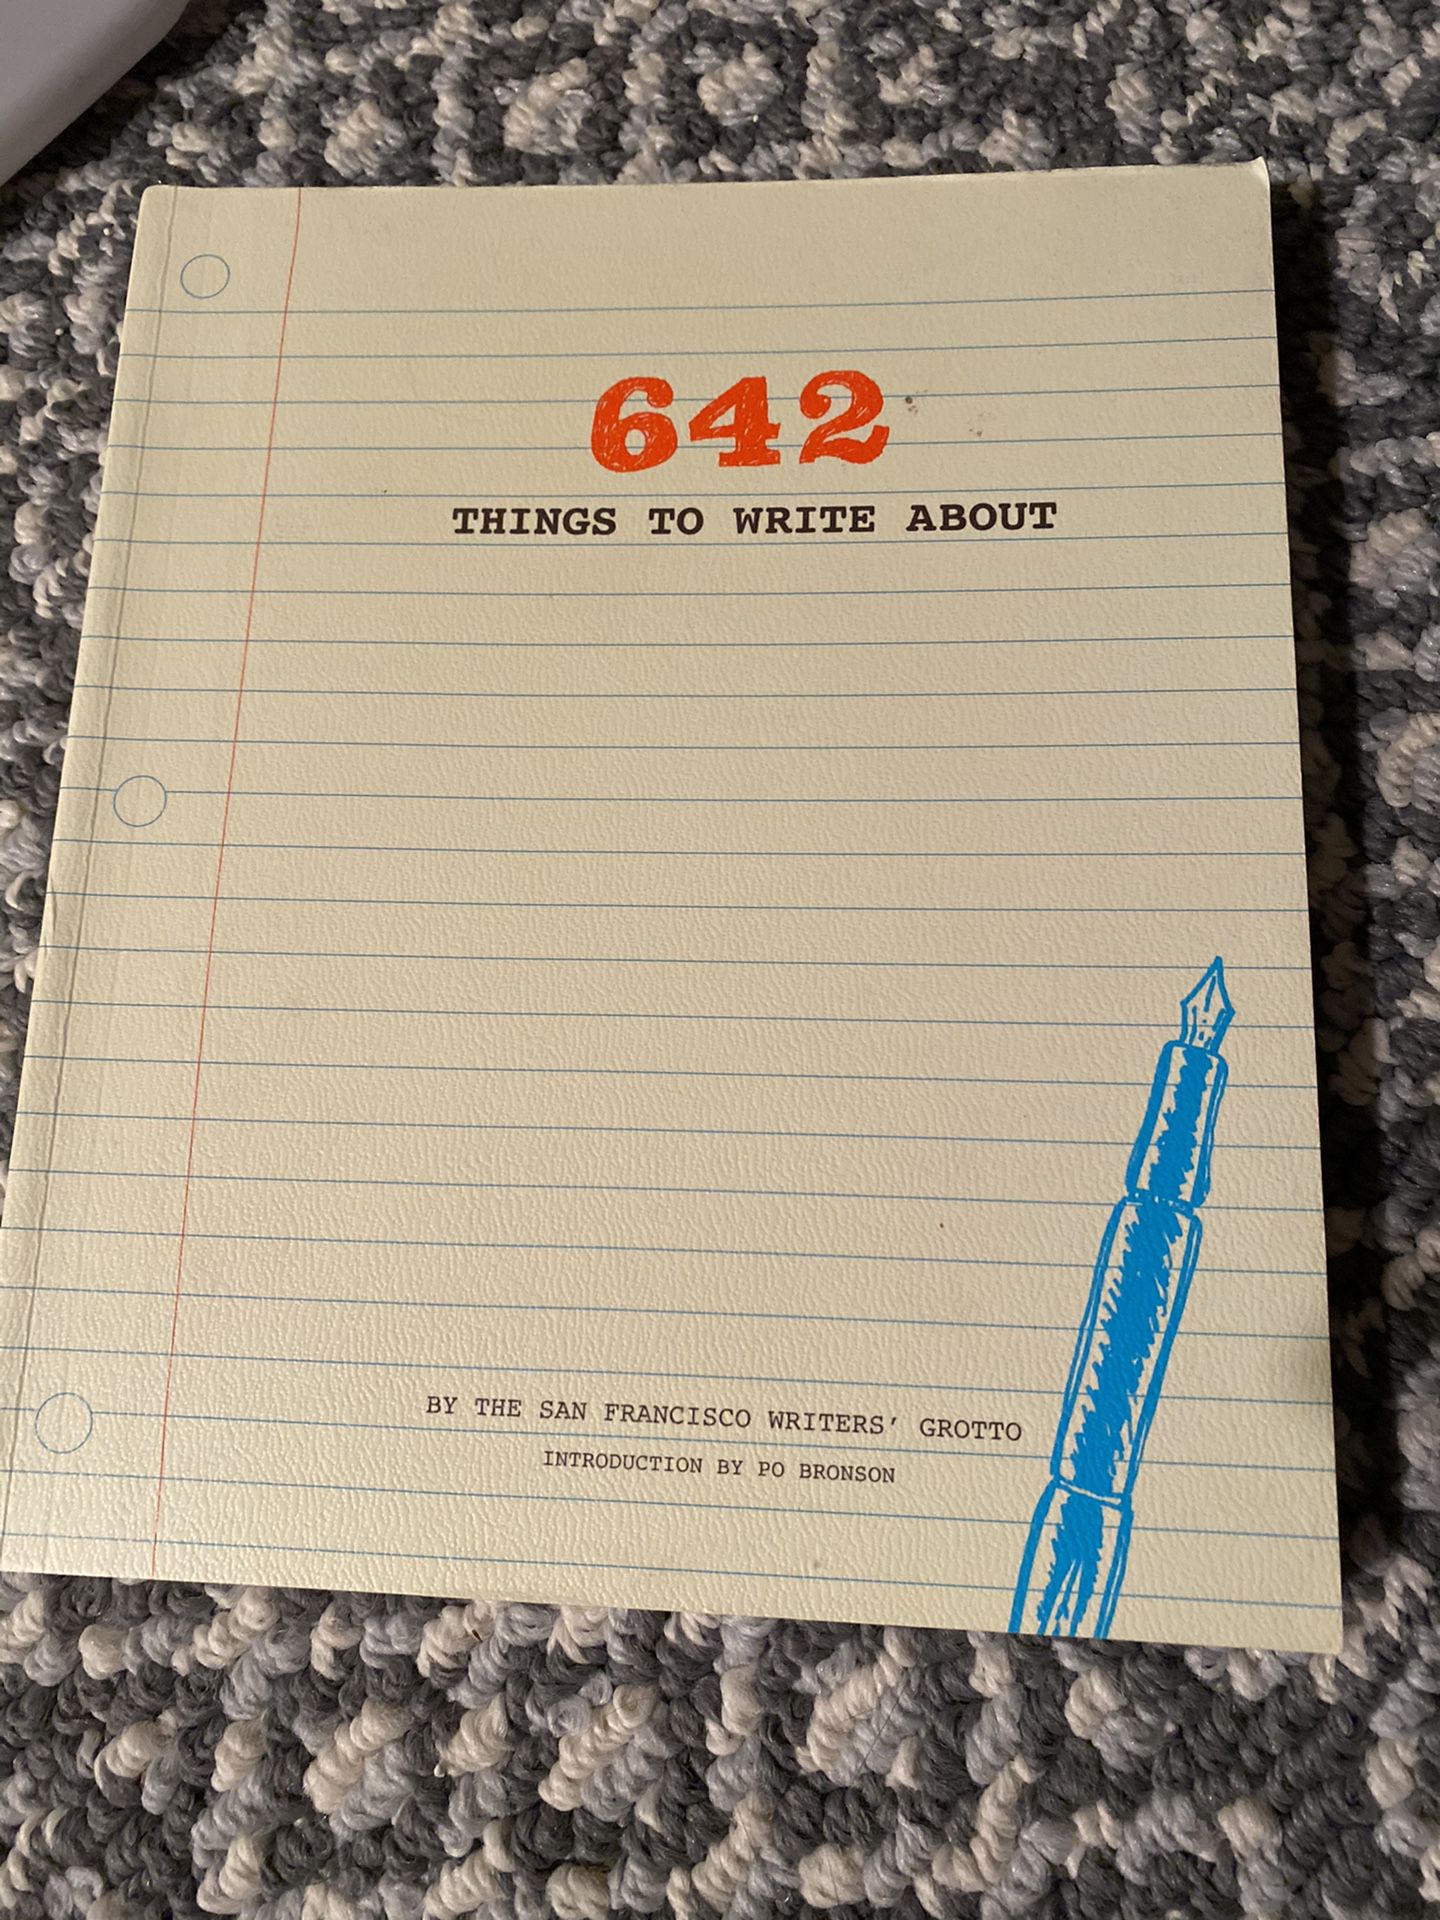 Journals/Books Writing Prompts “642 Things to Write About”